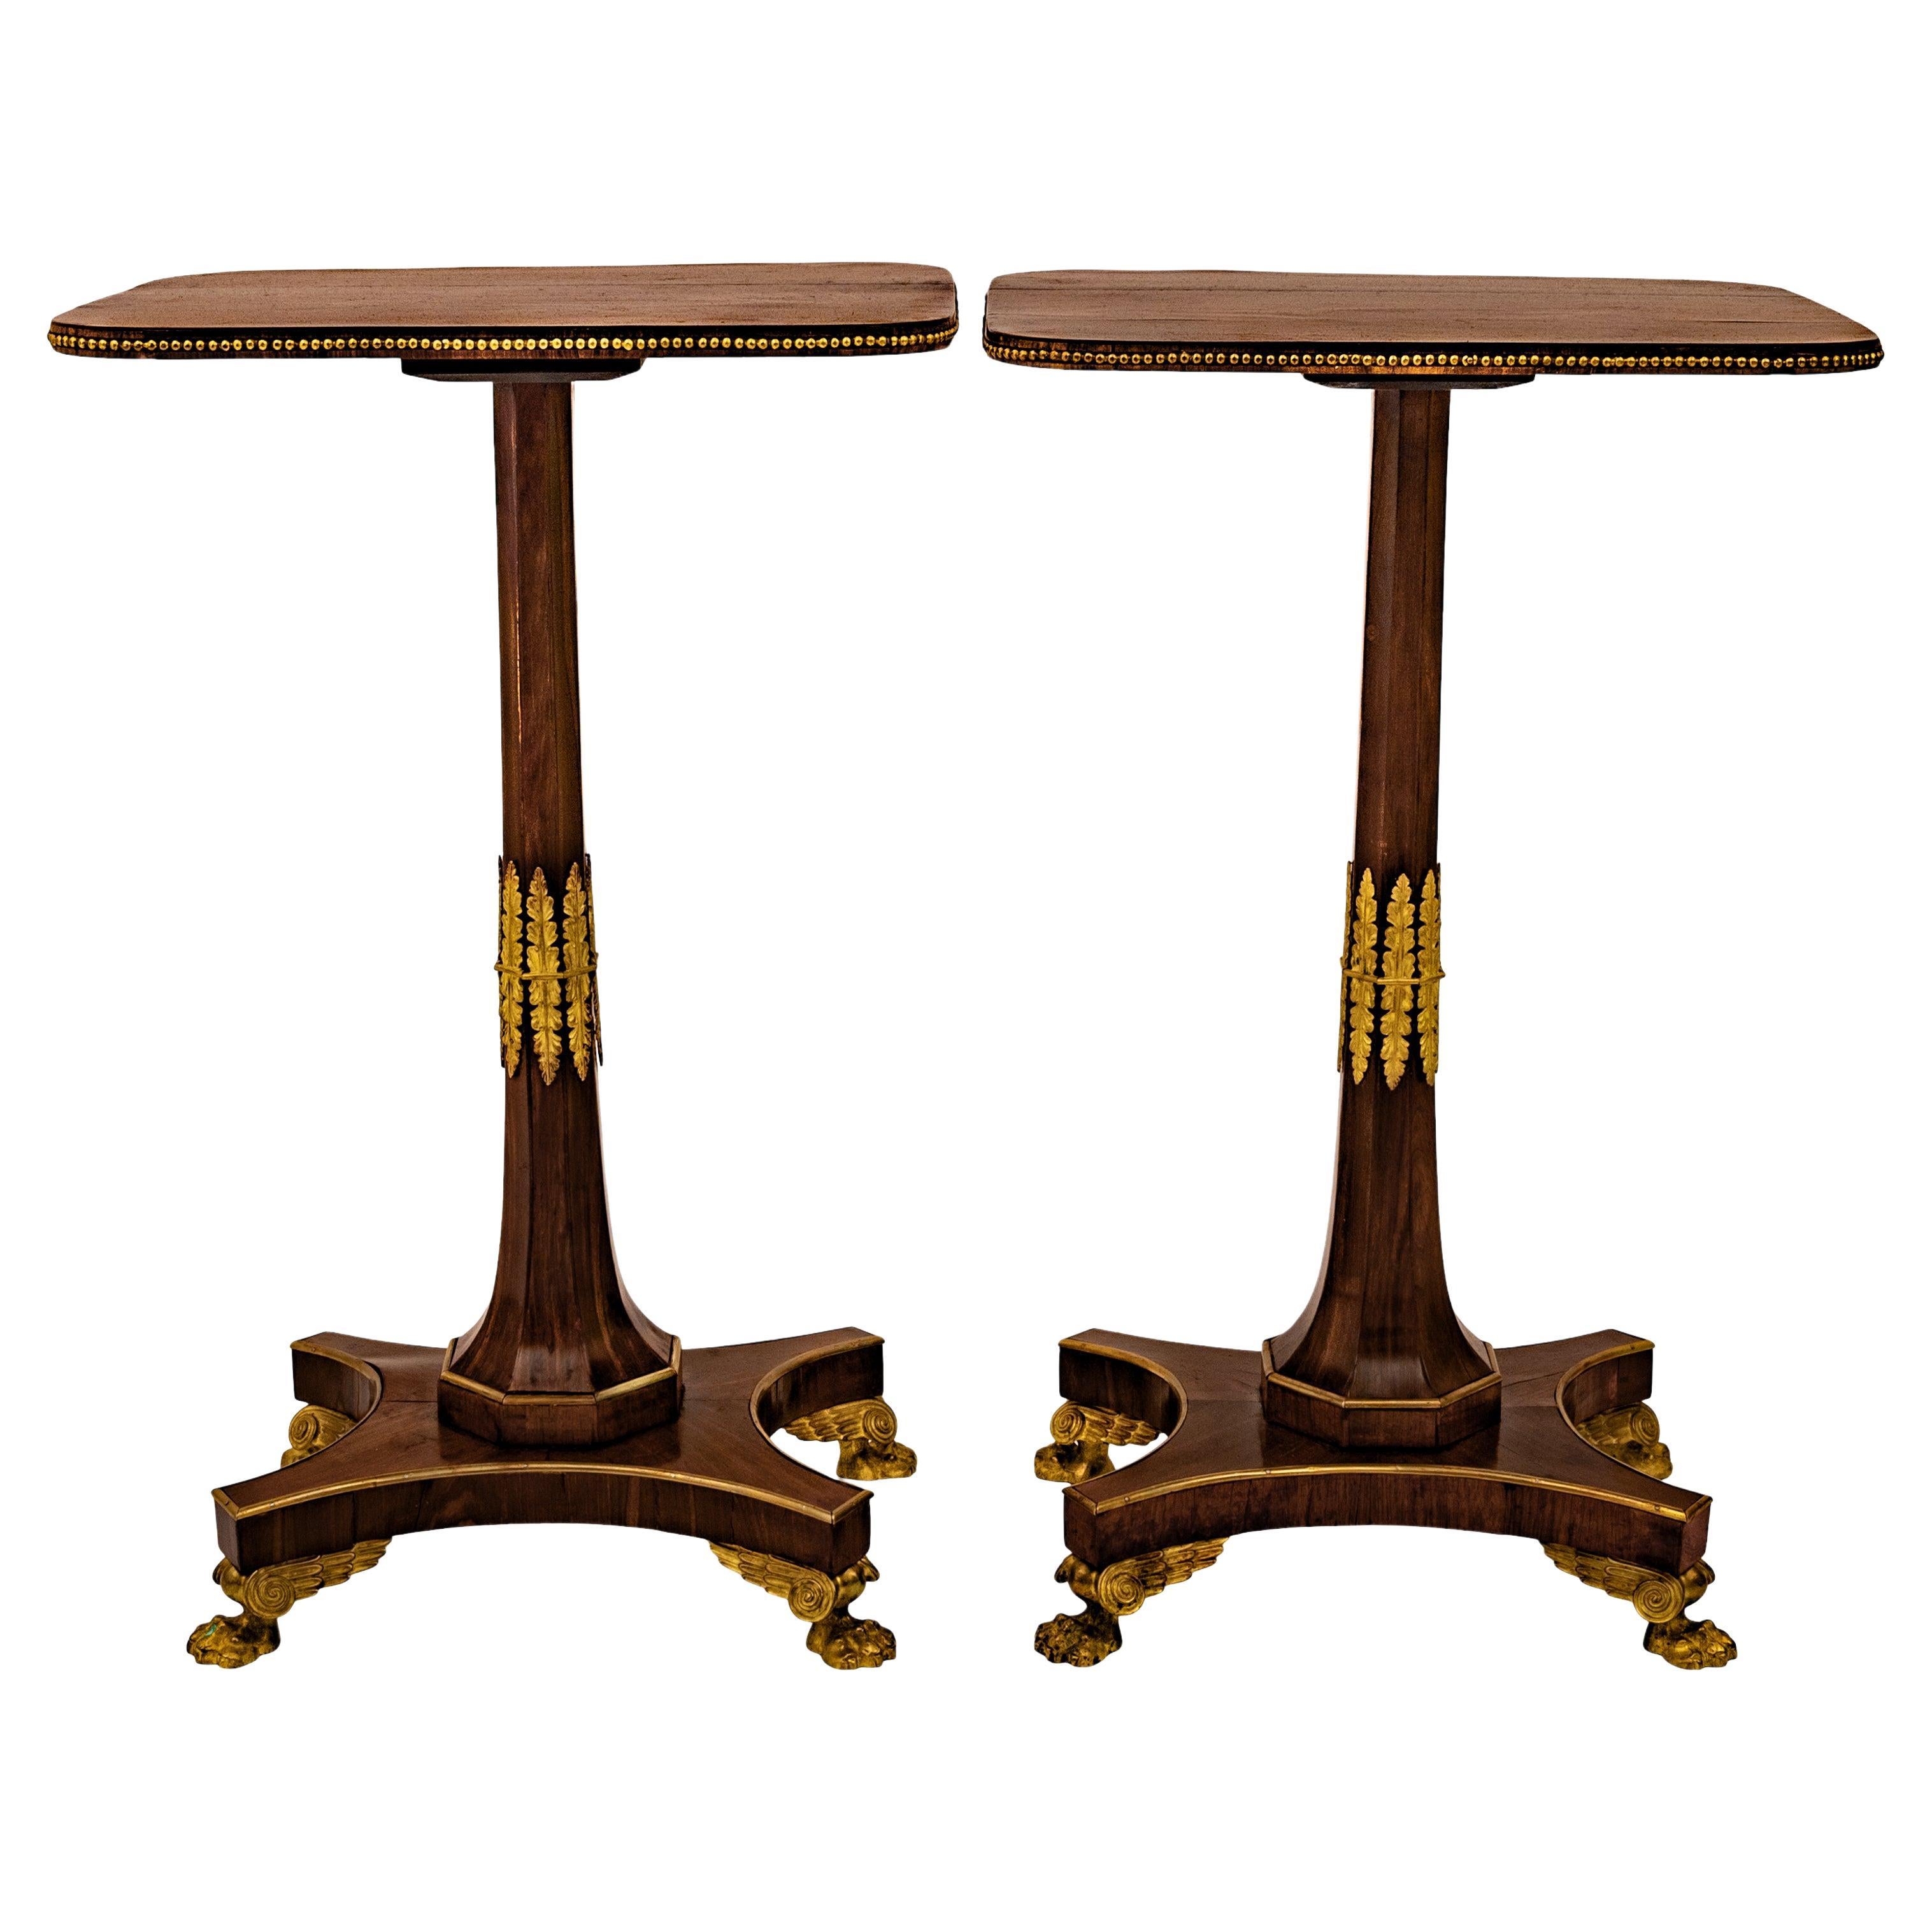 Pair Antique French Empire Napoleonic Neoclassical Rosewood Ormolu Side Tables